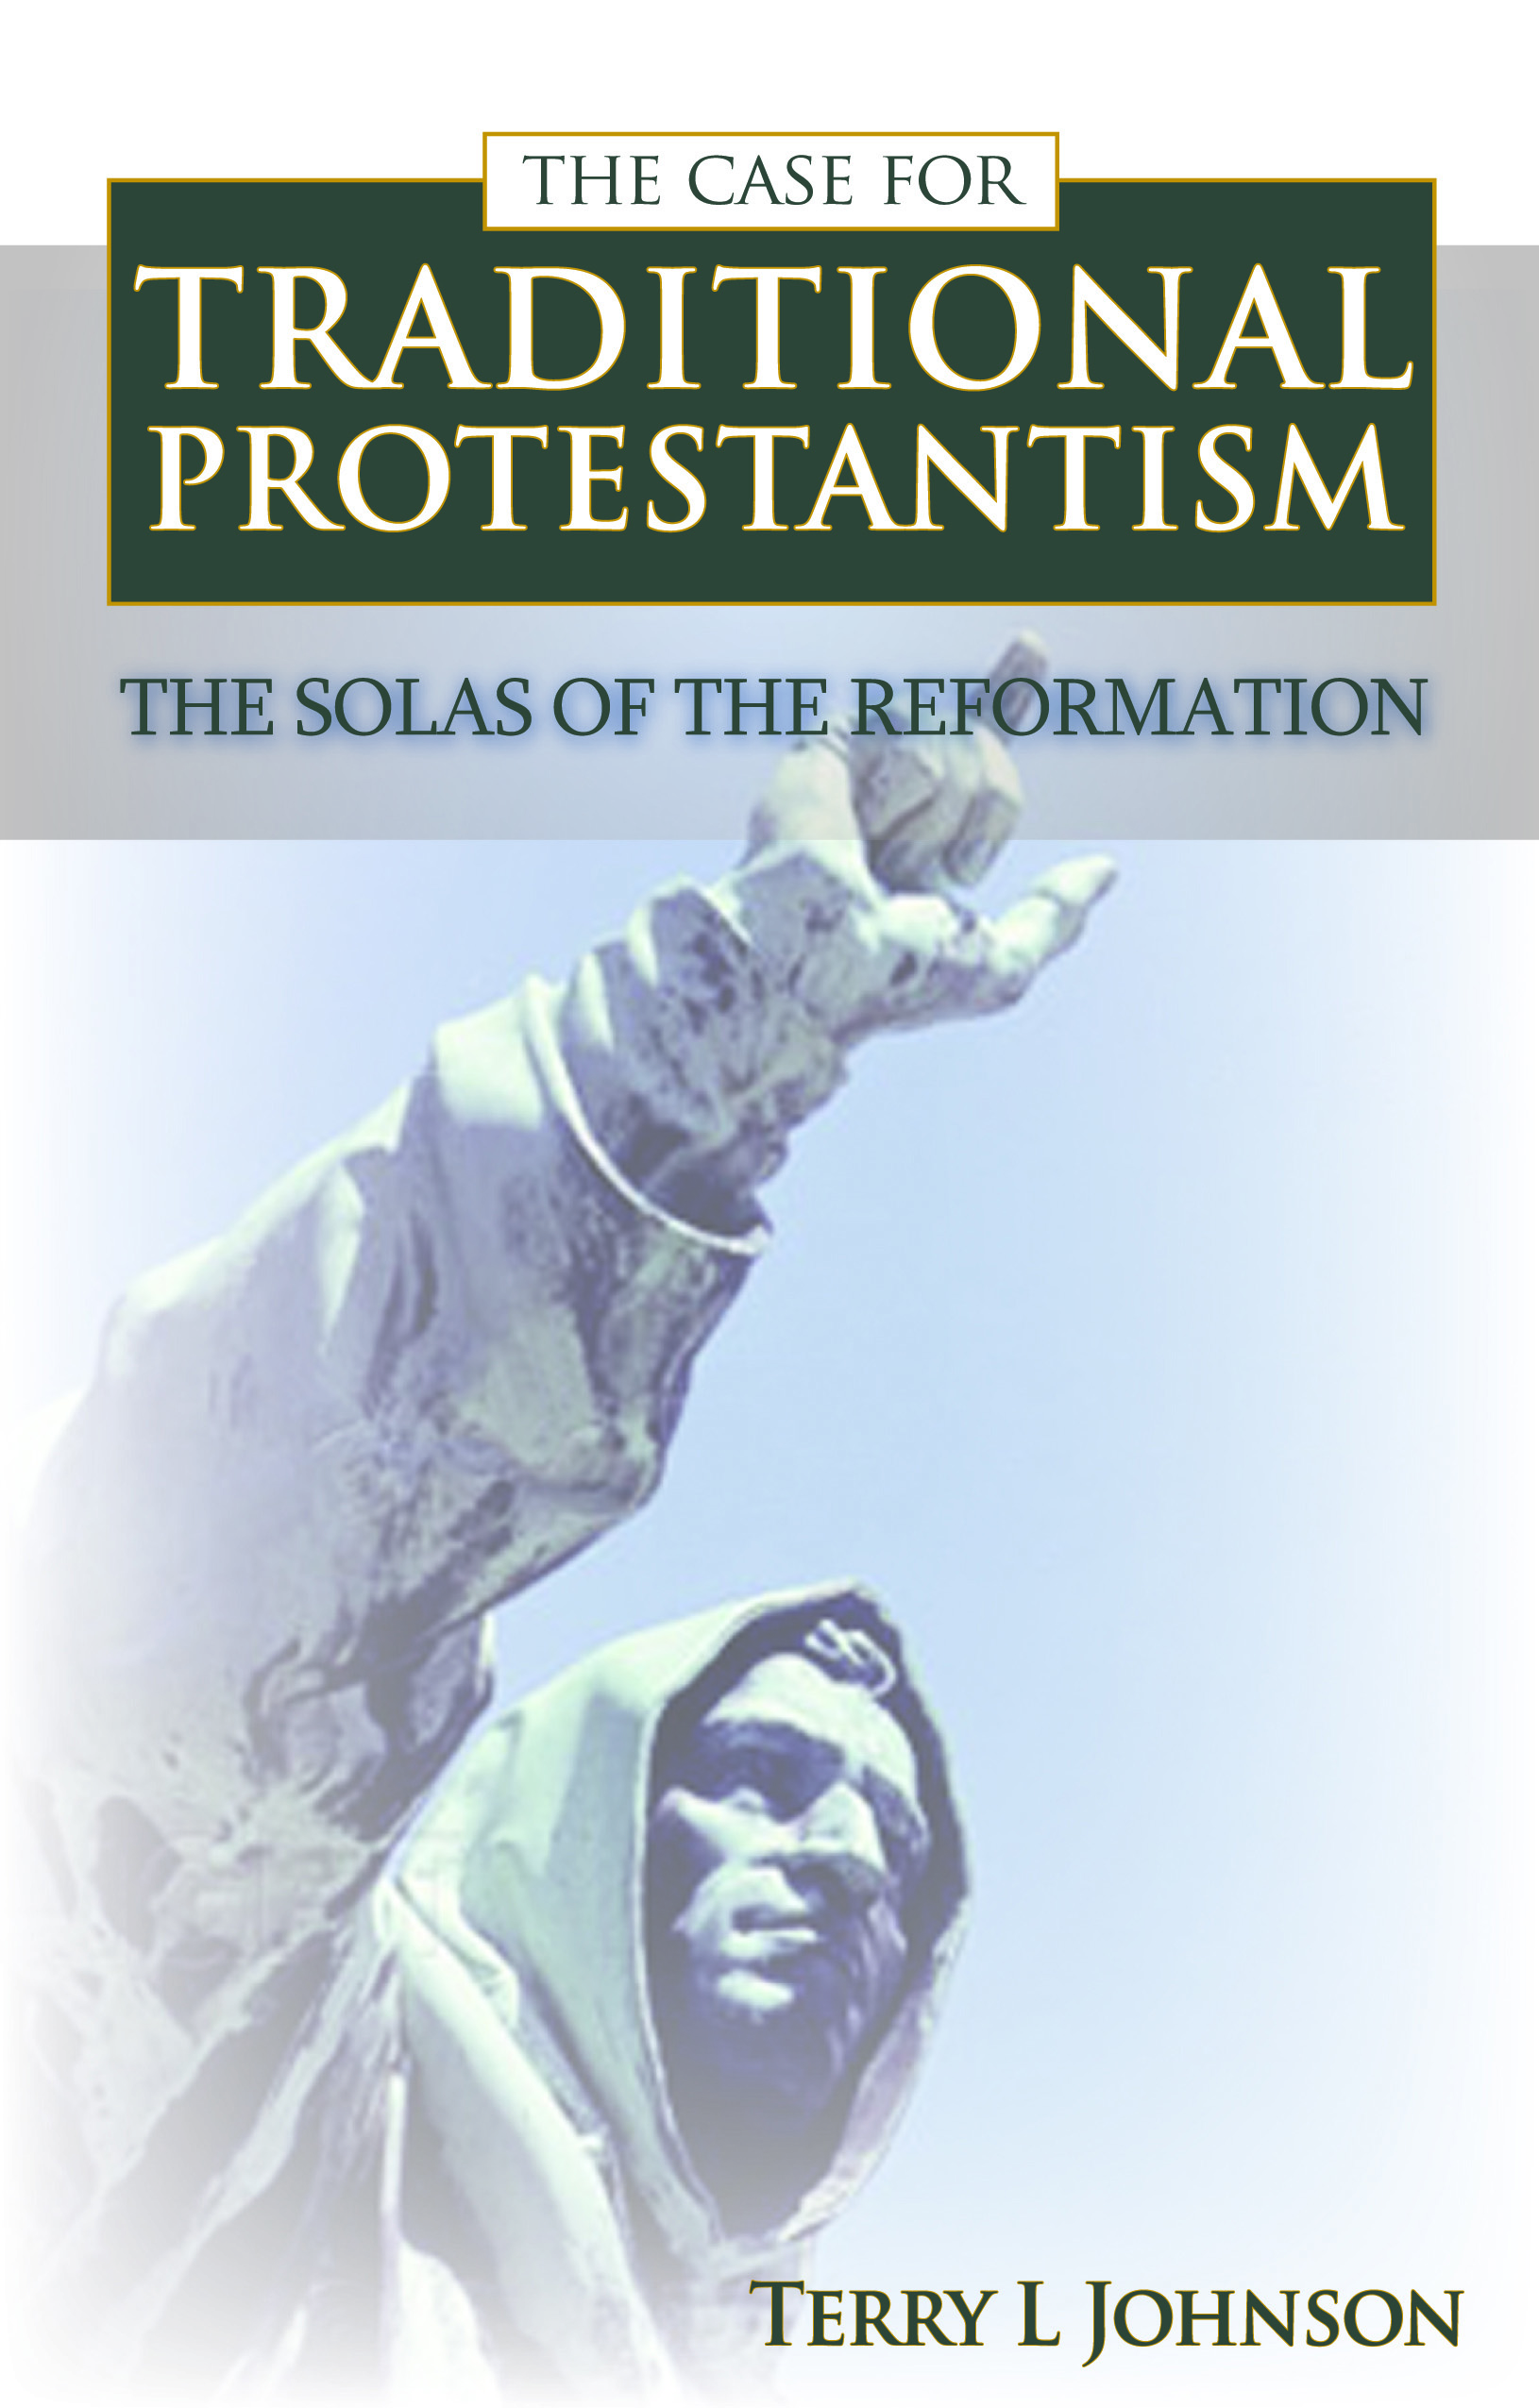 The Case for Traditional Protestantism